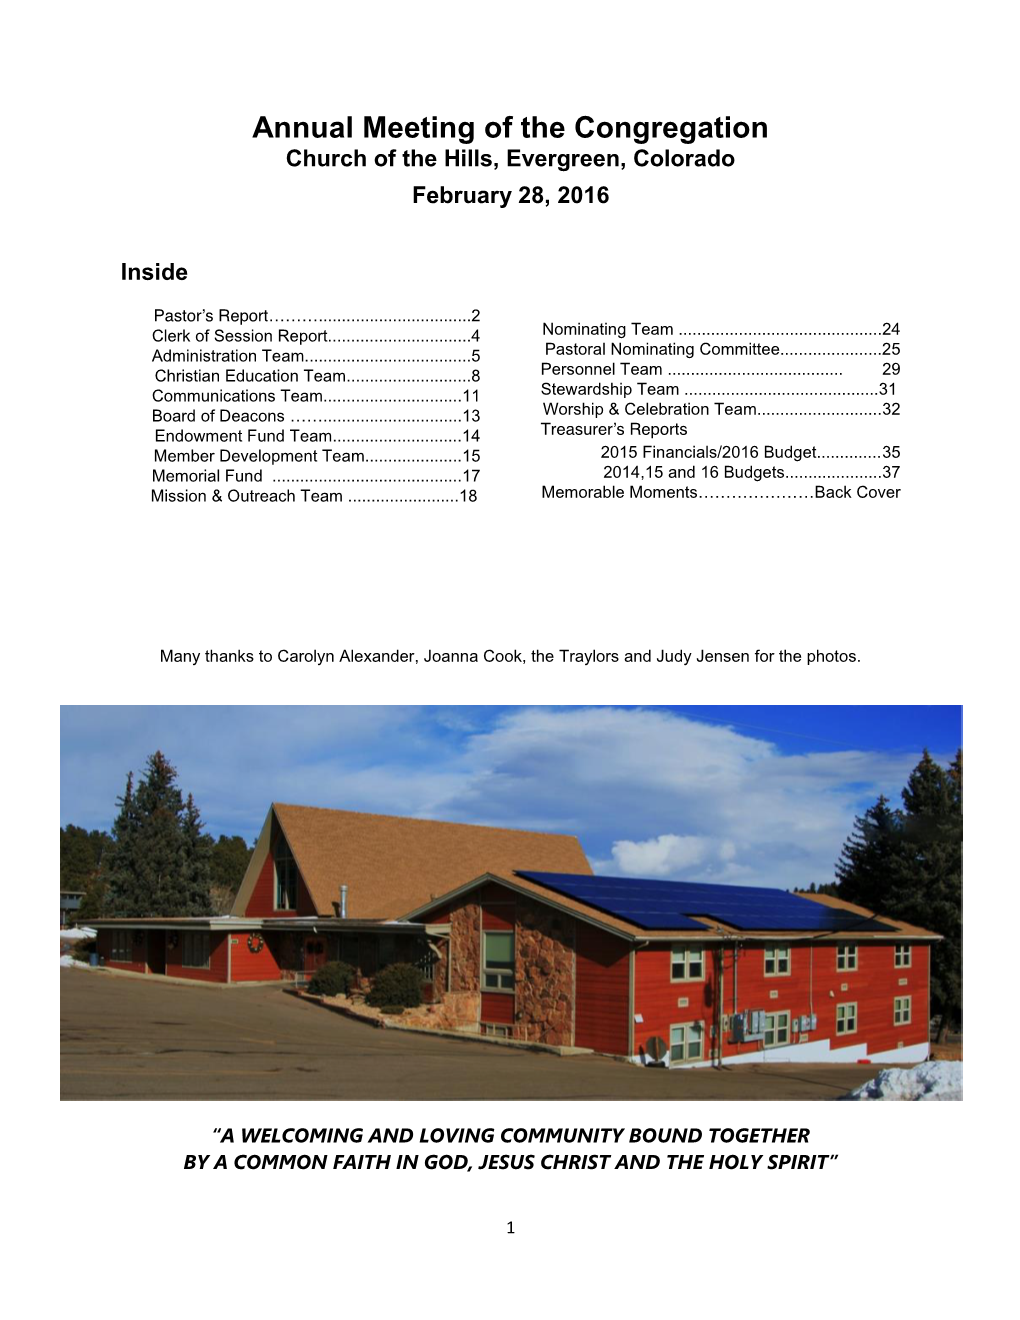 Annual Meeting of the Congregation Church of the Hills, Evergreen, Colorado February 28, 2016